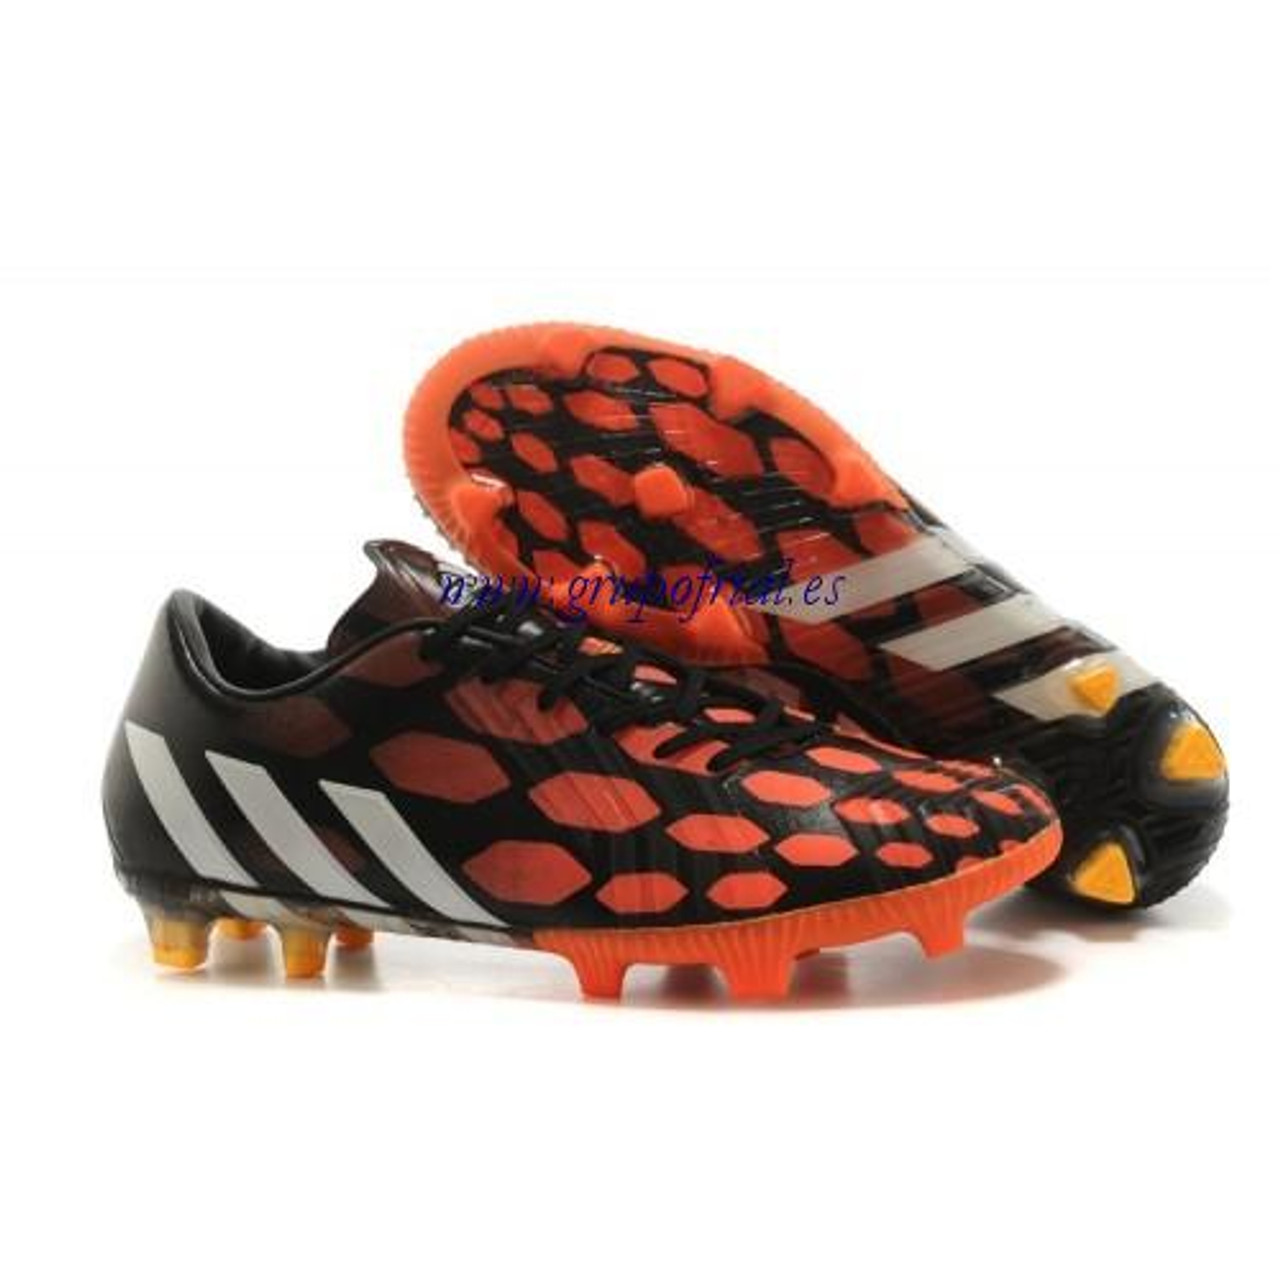 adidas red soccer boots